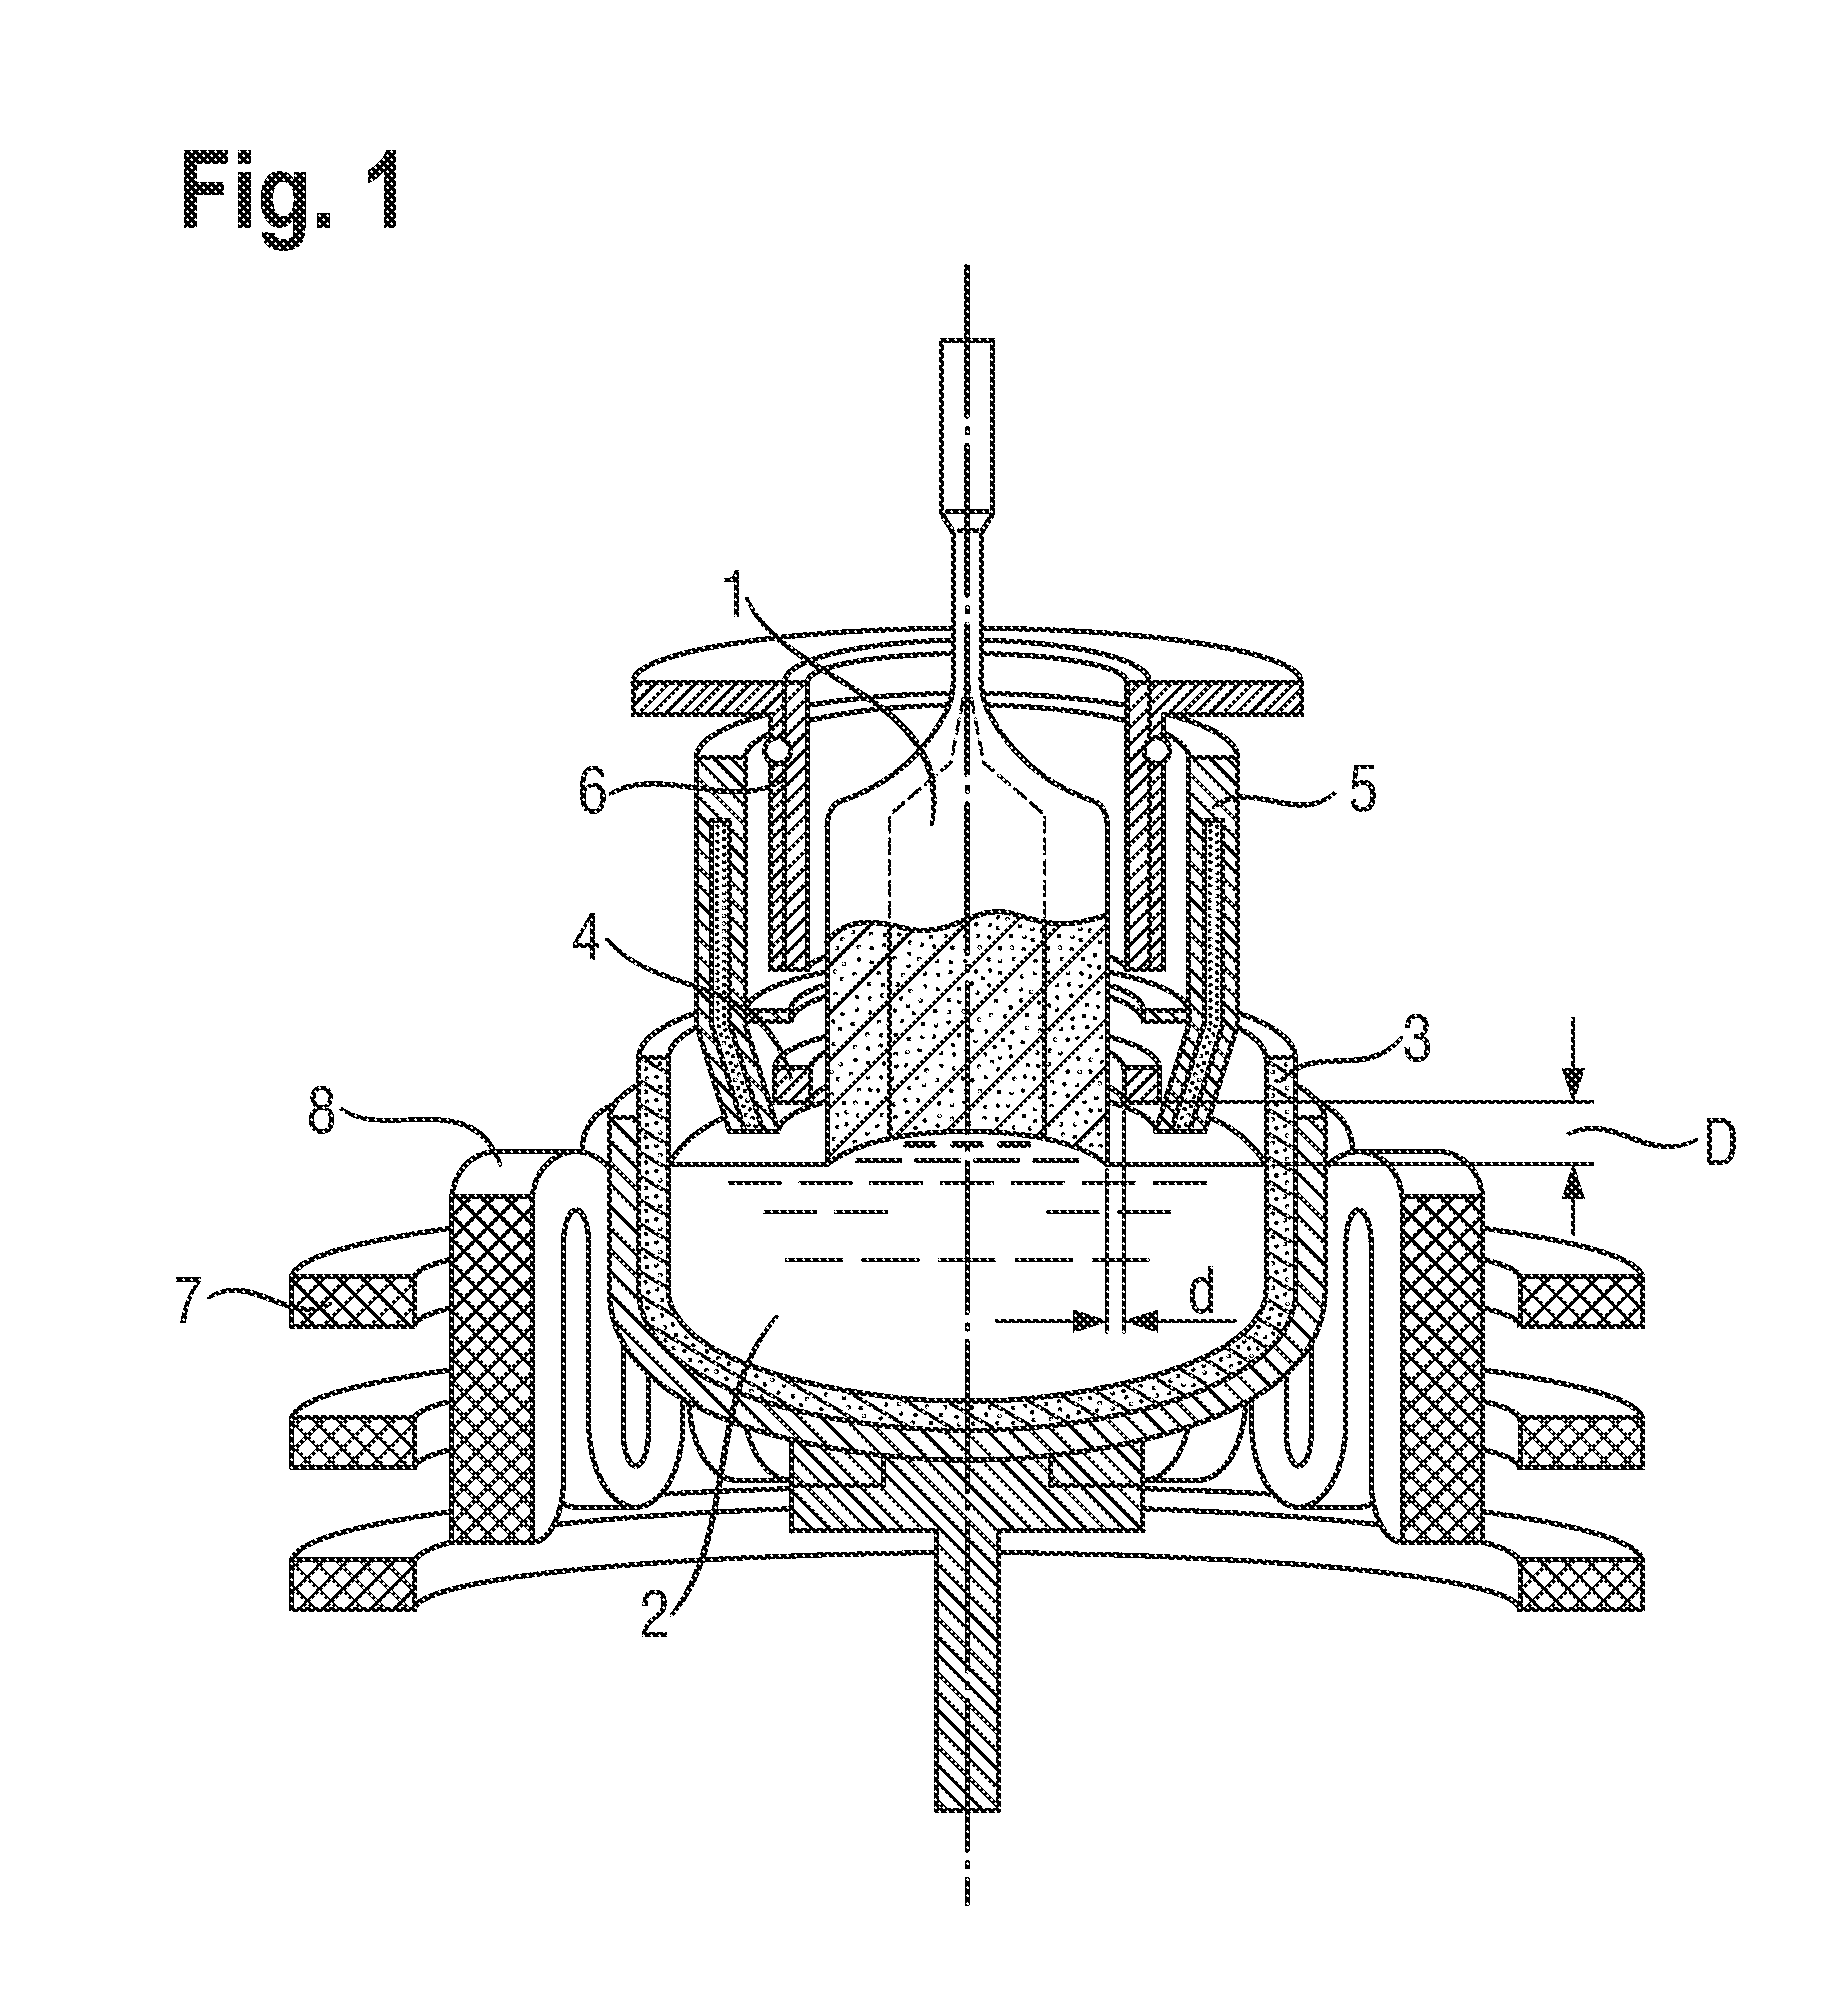 Method For Pulling A Single Crystal Composed Of Silicon With A Section Having A Diameter That Remains Constant